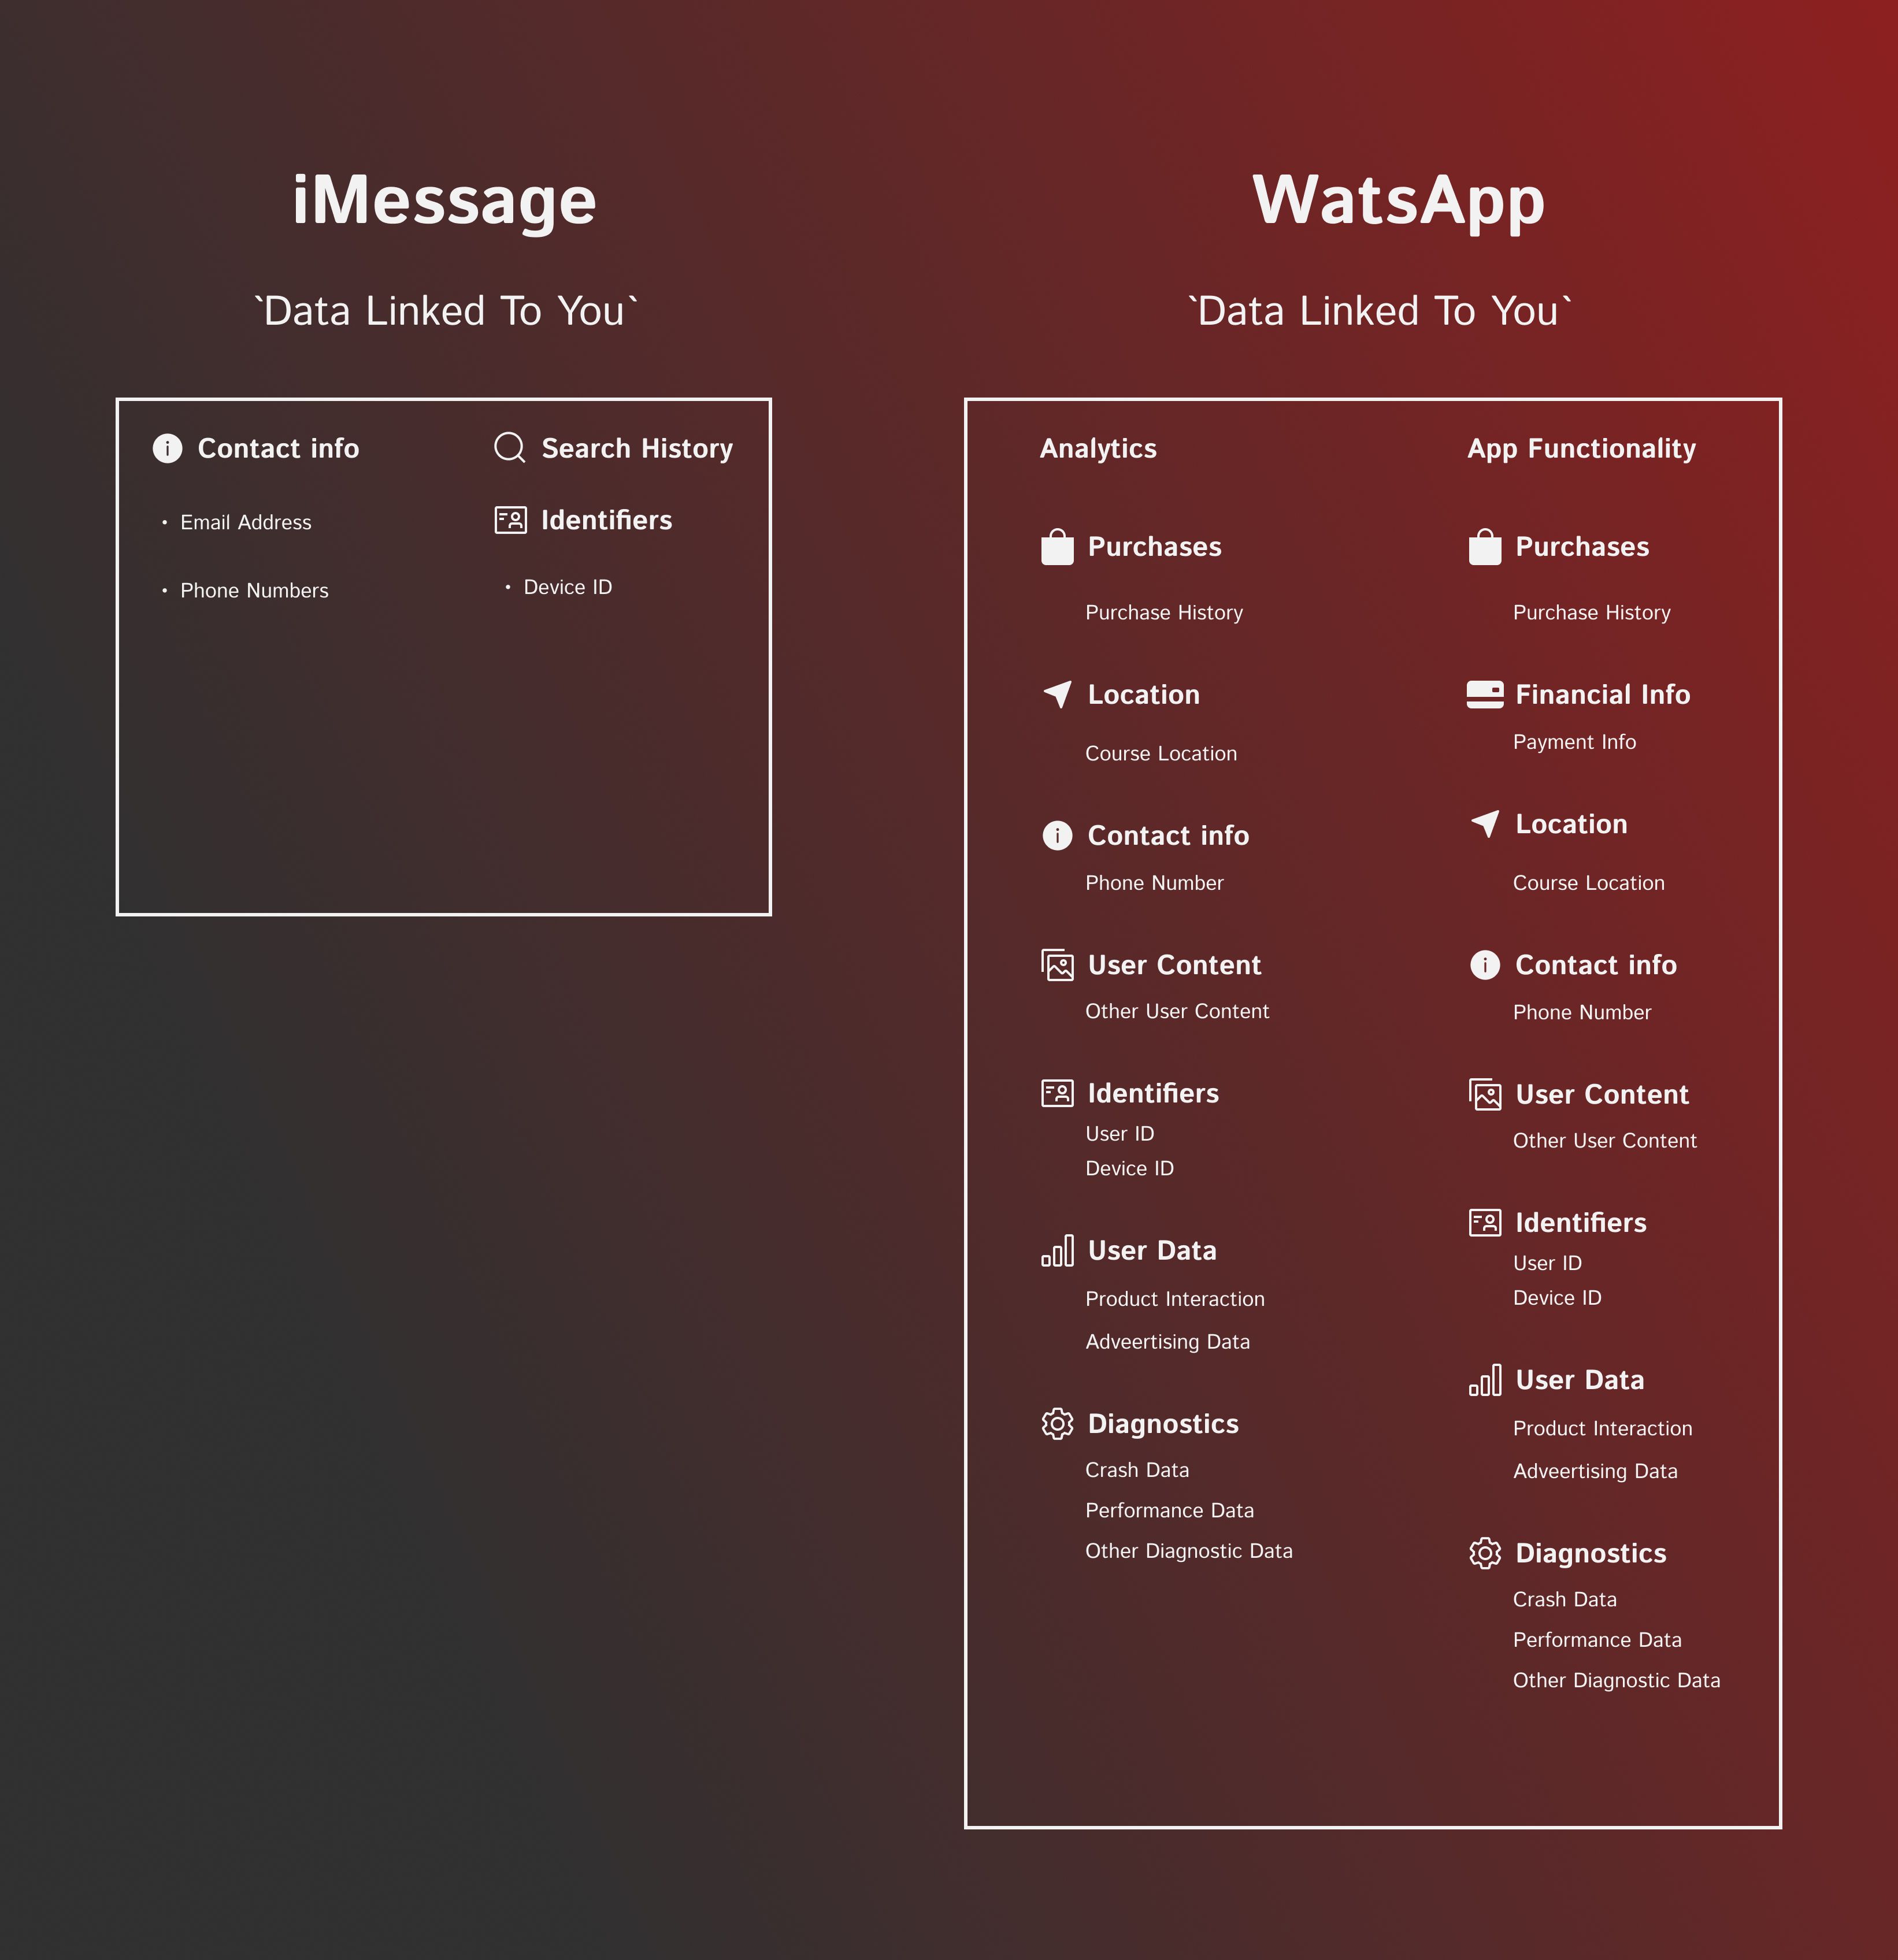 On the left, a list of data linked to you on iMessage, and on the right, a list of data linked to you from Whatsapp